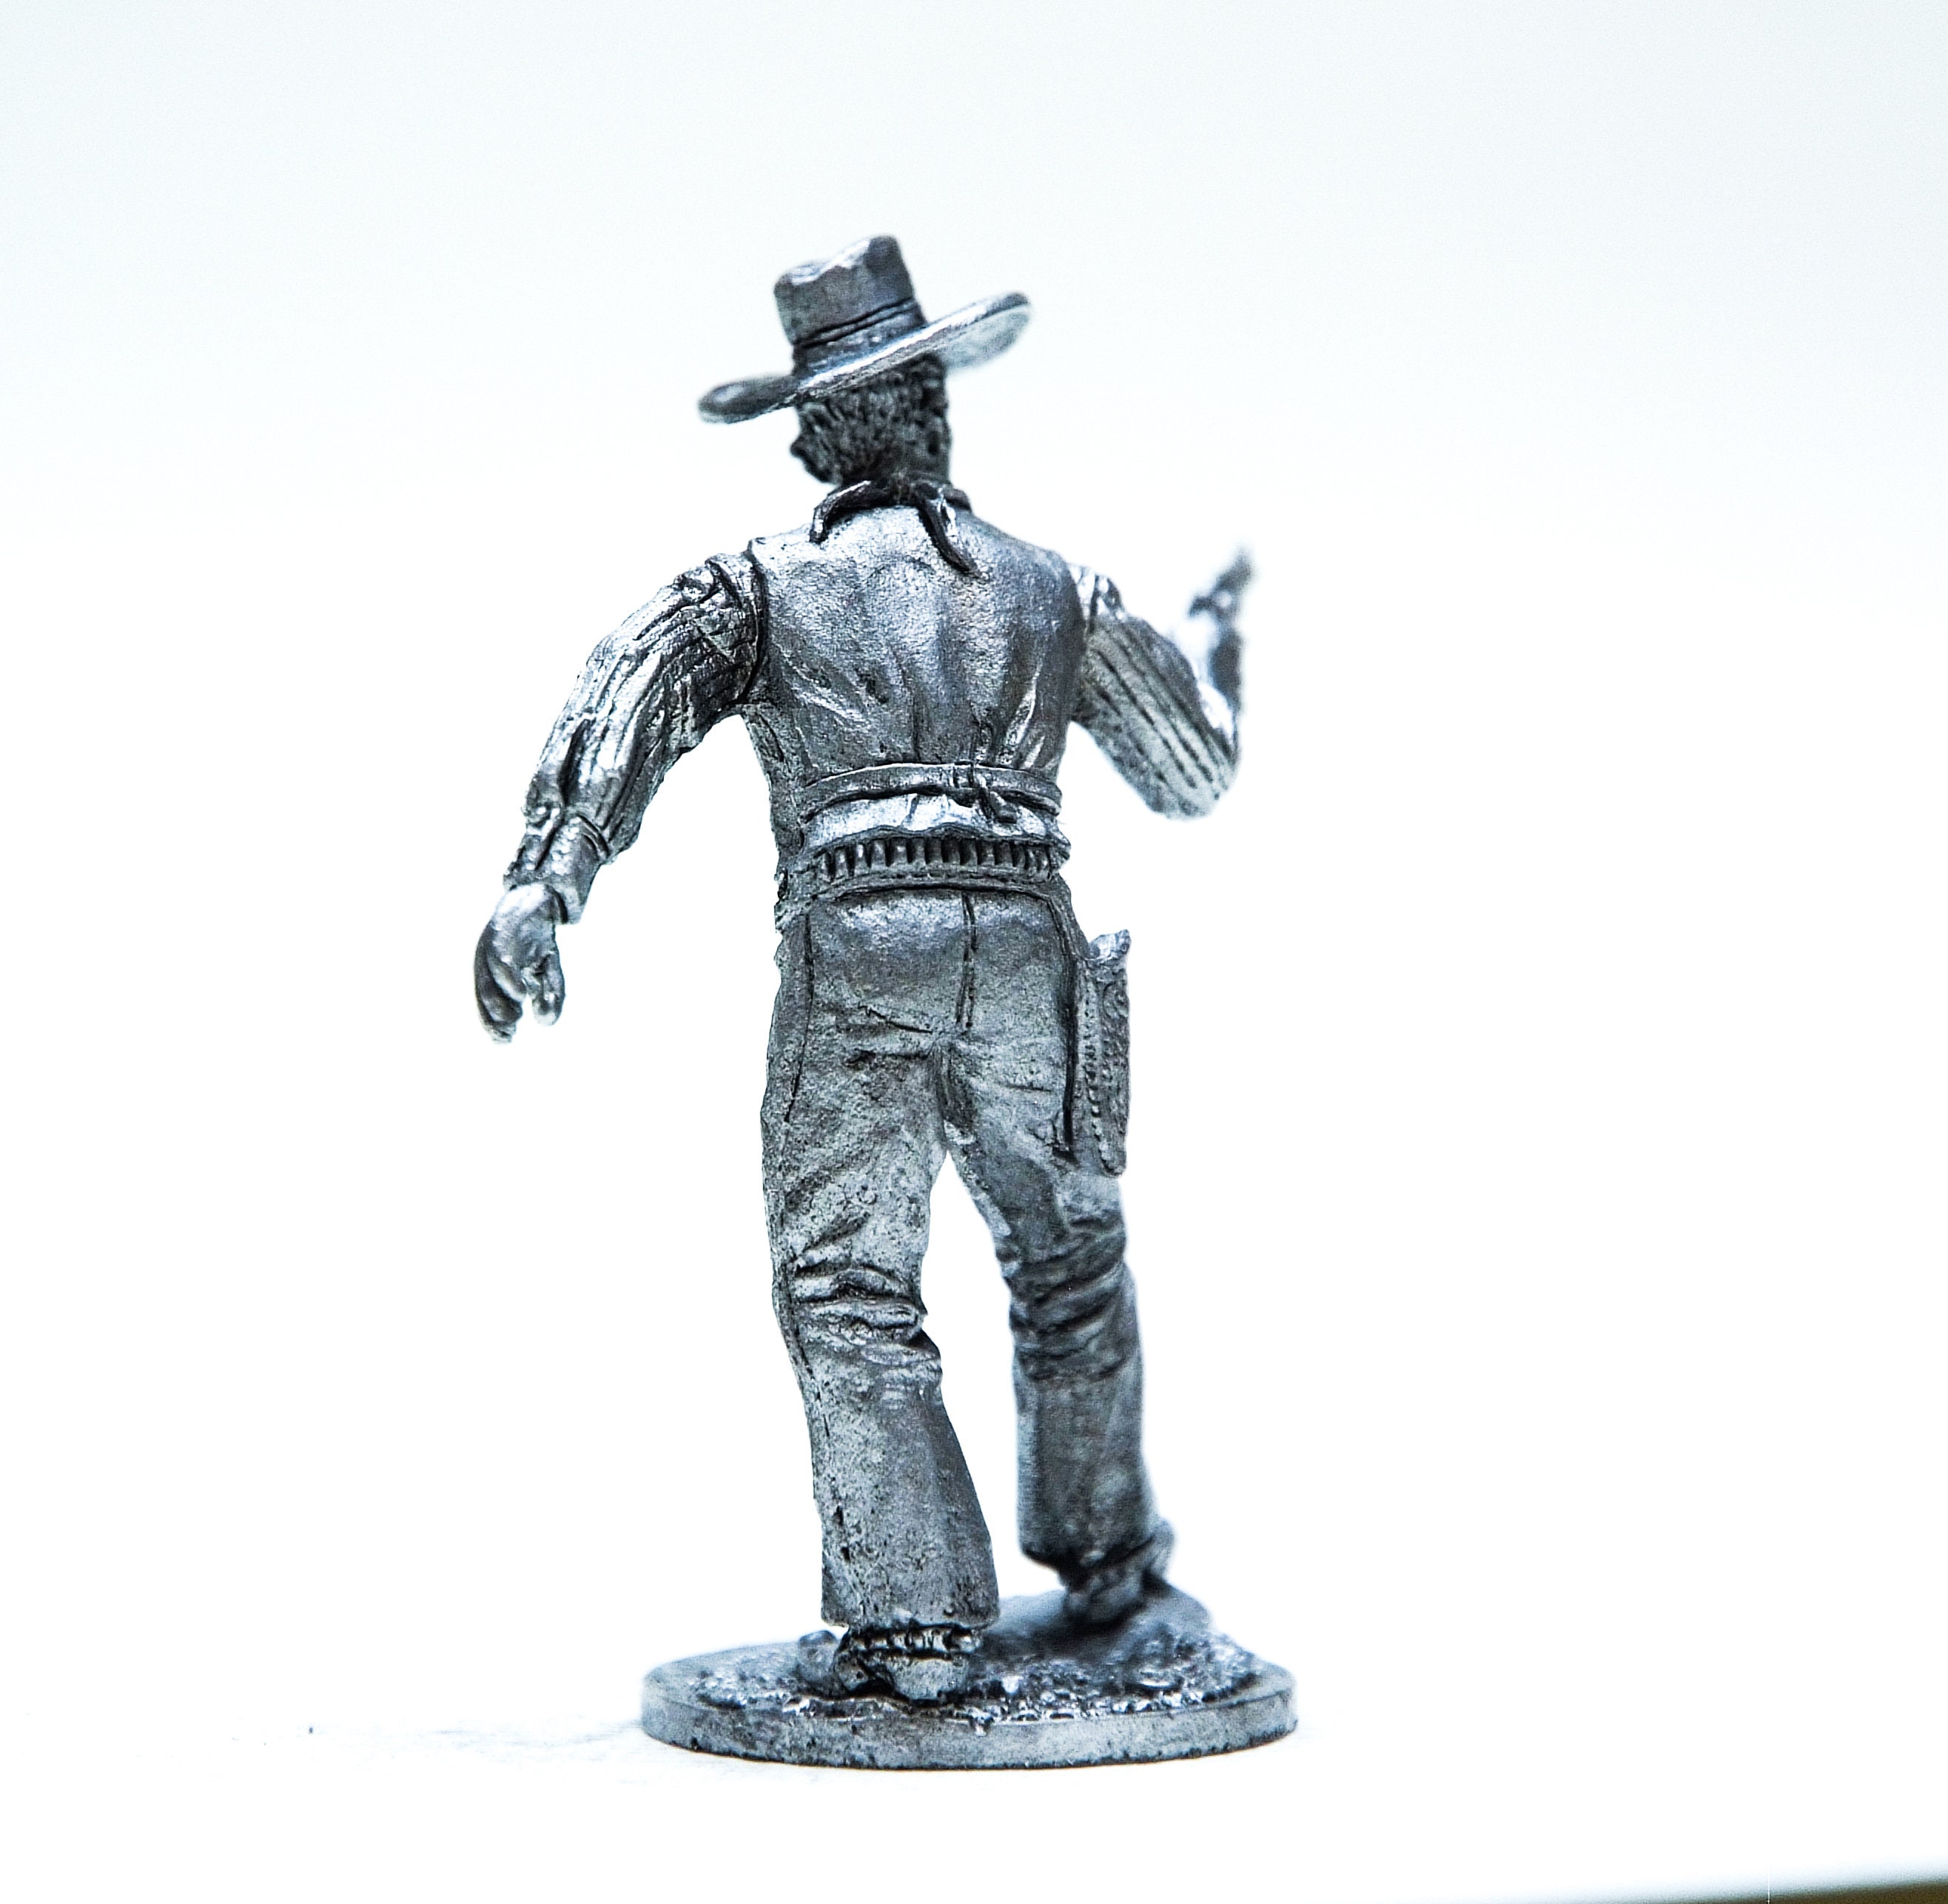 Details about   Painted WILD WEST Cowboy 19th century Metal Tin Figure 1/32 